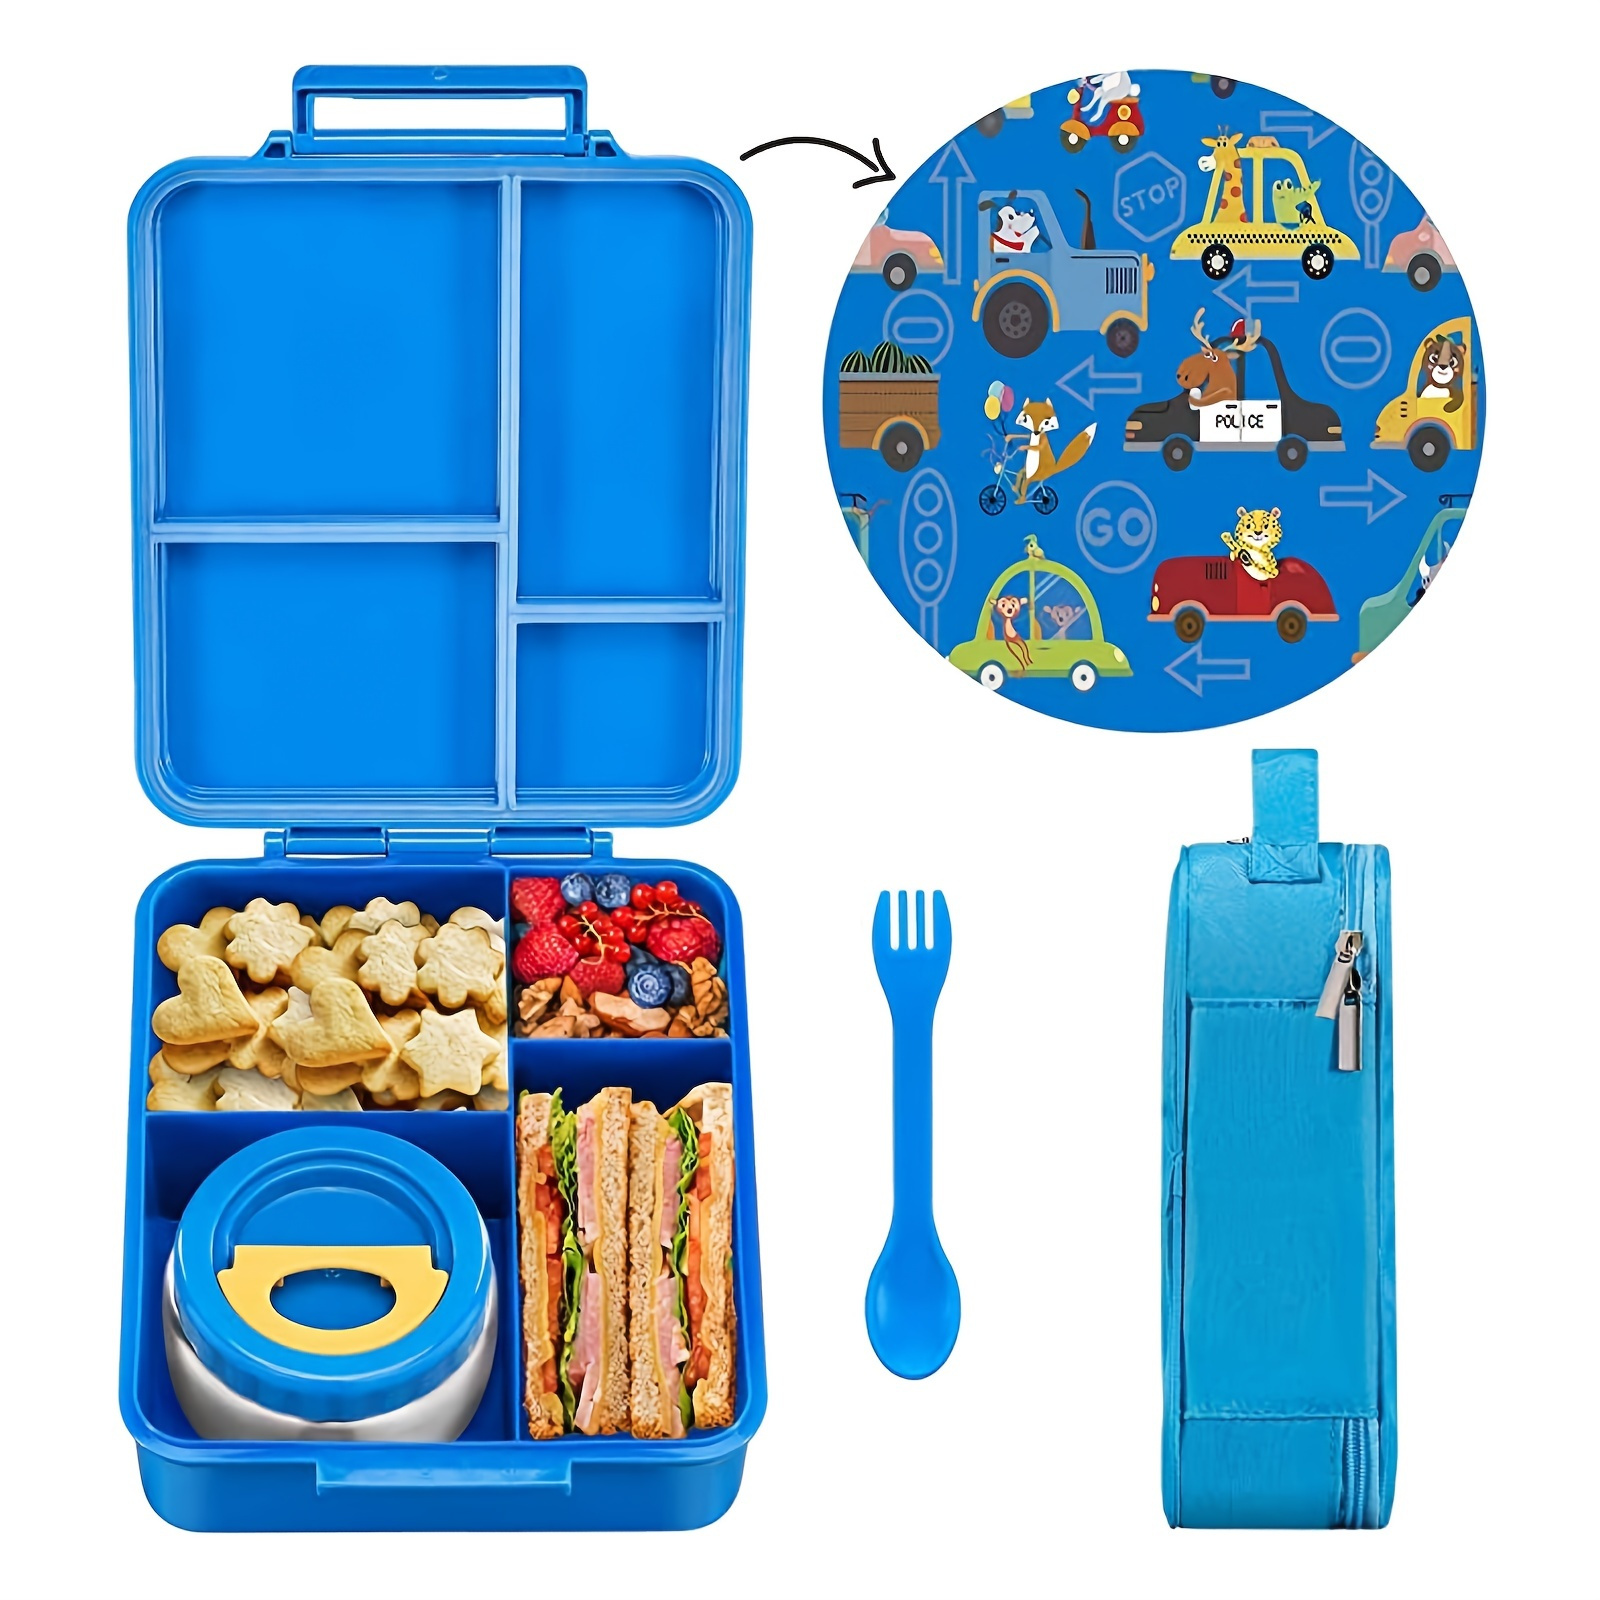 Bento Lunch Box For Kids With Soup, Leakproof Lunch Containers, 4